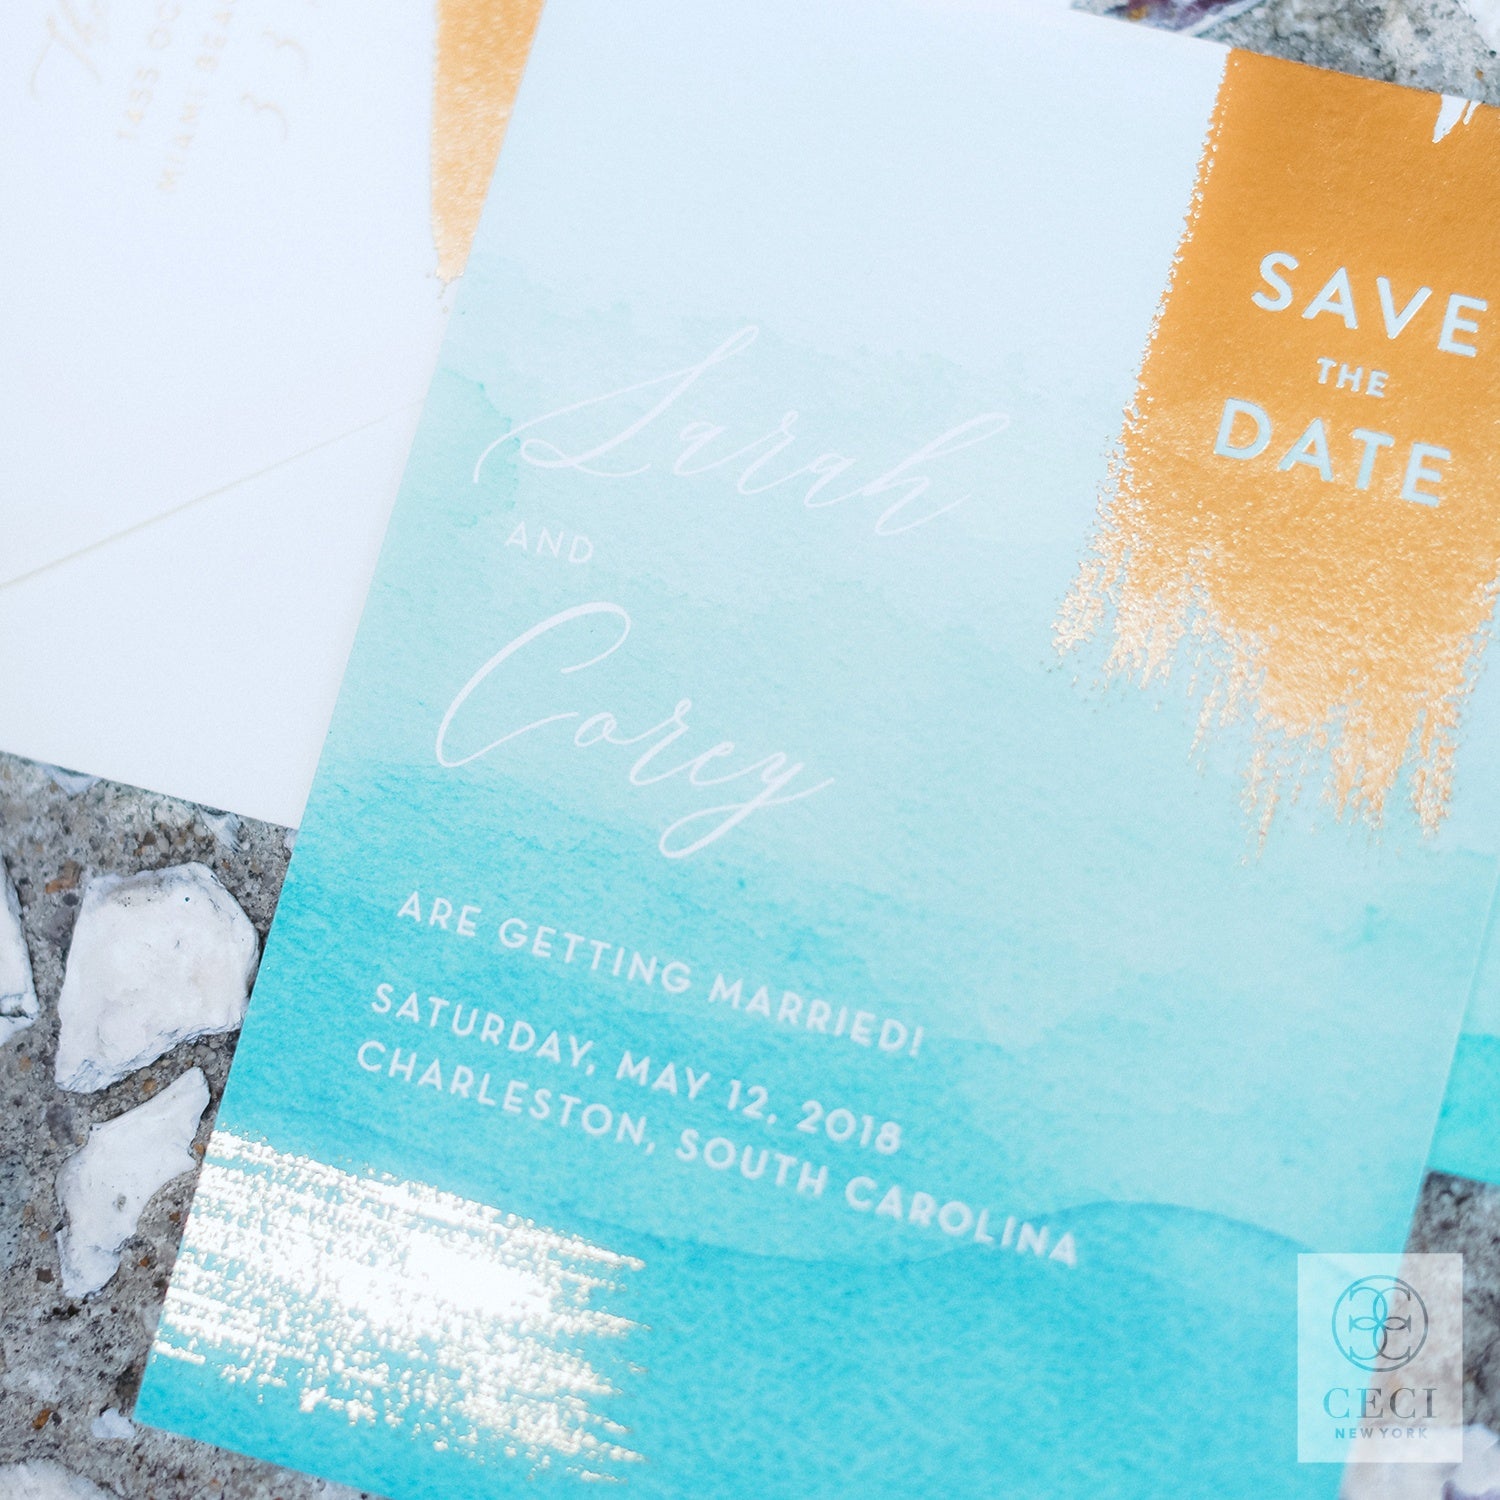 Tips for save the date etiquette